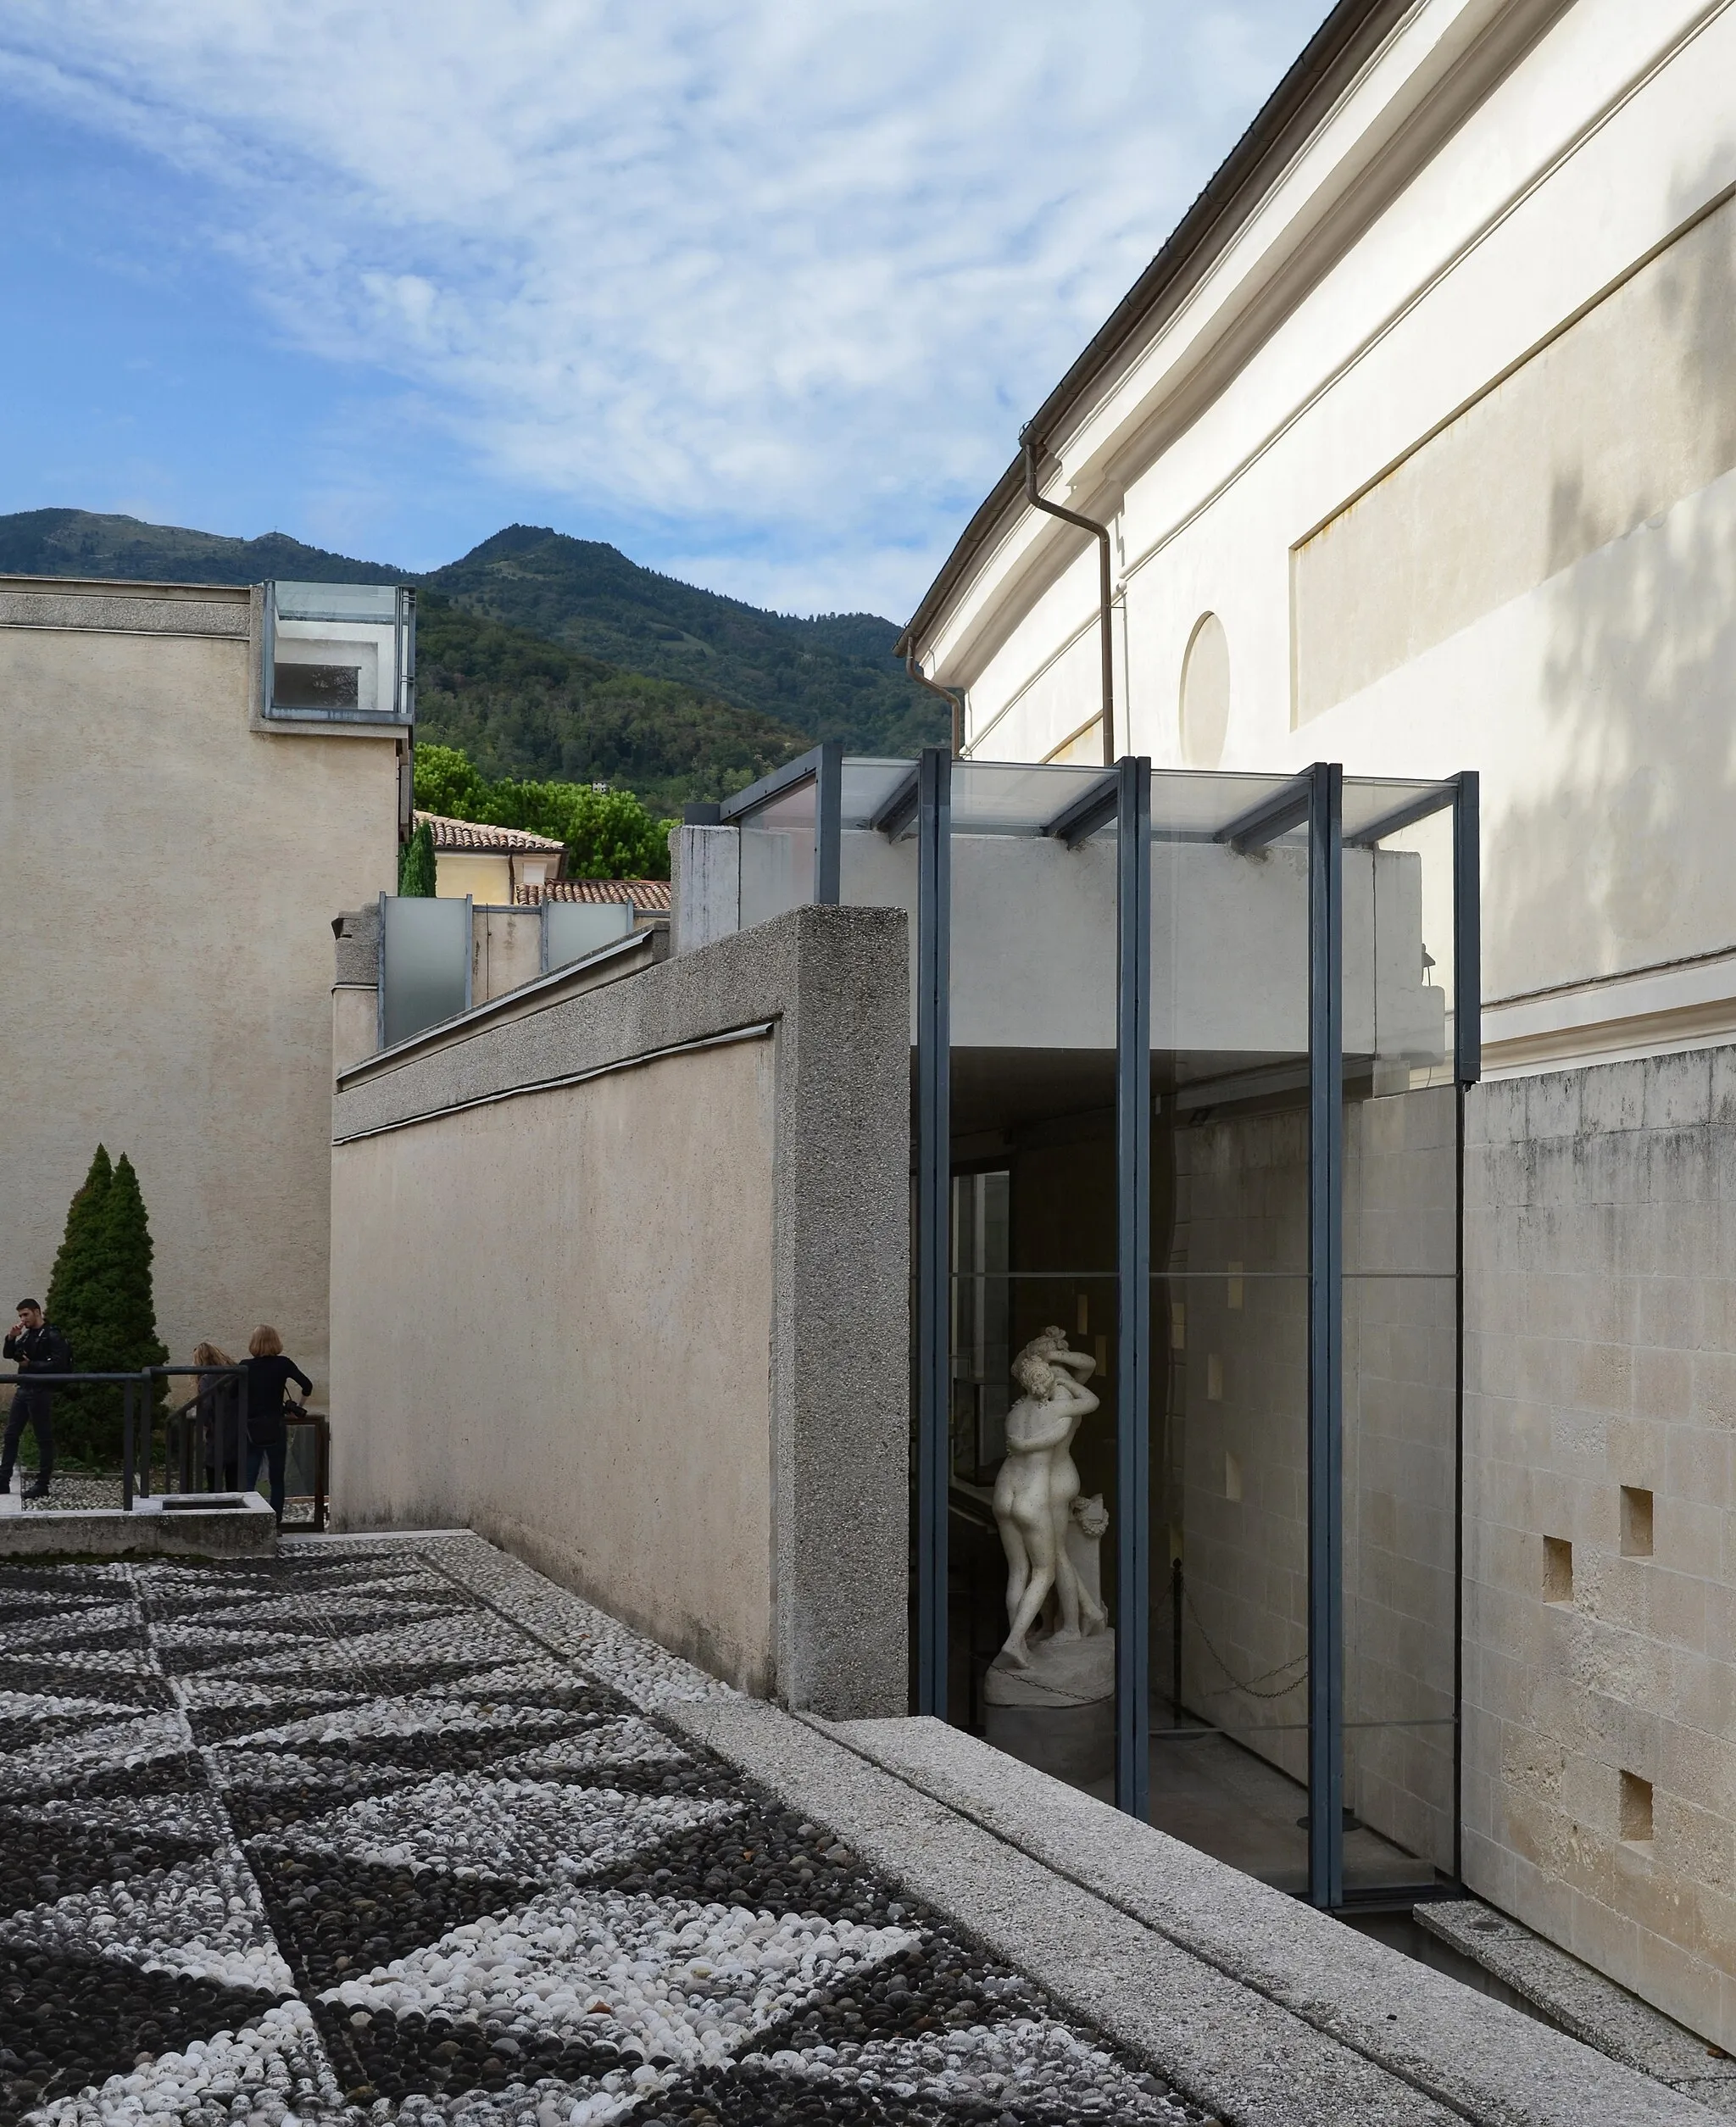 Photo showing: gipsoteca del canova, canova plaster cast gallery extension, possagno 1955-57.
architect: carlo scarpa 1906-1978 with v. pastor.
view from the south.
to the right is the original, 19th century museum. the rooms of scarpa's extension are articulated almost as individual buildings and follow the the outline of earlier houses on the site, giving us an example of the layered compositions he would later be famous for.
even if this layering is less extreme than in scarpa's final buildings, the elements of his architecture are carefully drawn apart and given their individuality before being assembled. the windows are the obvious example here, most are highly original takes on the modernist corner window, physically lifted out of the walls they would normally be set in. I count five distinctly different light sources in this photo alone - and remember that the interior is one continuous, unfolding space.
but we should also look at the walls. right to left, we find three walls that are not quite parallel, not of the same height, and not built in the same way. the first one is the imposing outer wall of the first museum. its detailing and decoration is entirely conventional, but it gains its presence from sheer size.
the second wall, at a distance from the old museum, delineates the new building but does little else. it does not support anything other than itself (the roof being supported on a steel beam). yet it gains an expression of equal intensity to its much larger neighbour by being in natural stone, almost as if it were a found wall.
at an angle and at a different height is finally the main wall of scarpa's extension, separated into a concrete frame and a rendered, blank wall. I believe scarpa is creating a syntactical relationship between the separated parts which is as strong, albeit very different from, similar walls united in a traditional box. we often talk about this, especially in the later works, using words like fragments or fragmentation, but there are negative connotations to words like these that are not true of the architecture they are meant to represent.
(the steel mullions in the window facing the three graces are not original, if I remember correctly. I think they were hardwood when I saw them first some twenty years ago).
this photo was uploaded with a CC license and may be used free of charge and in any way you see fit.
if possible, please name photographer "SEIER+SEIER". 
if not, don't.
do NOT copy texts, tags and comments.

the scarpa set.